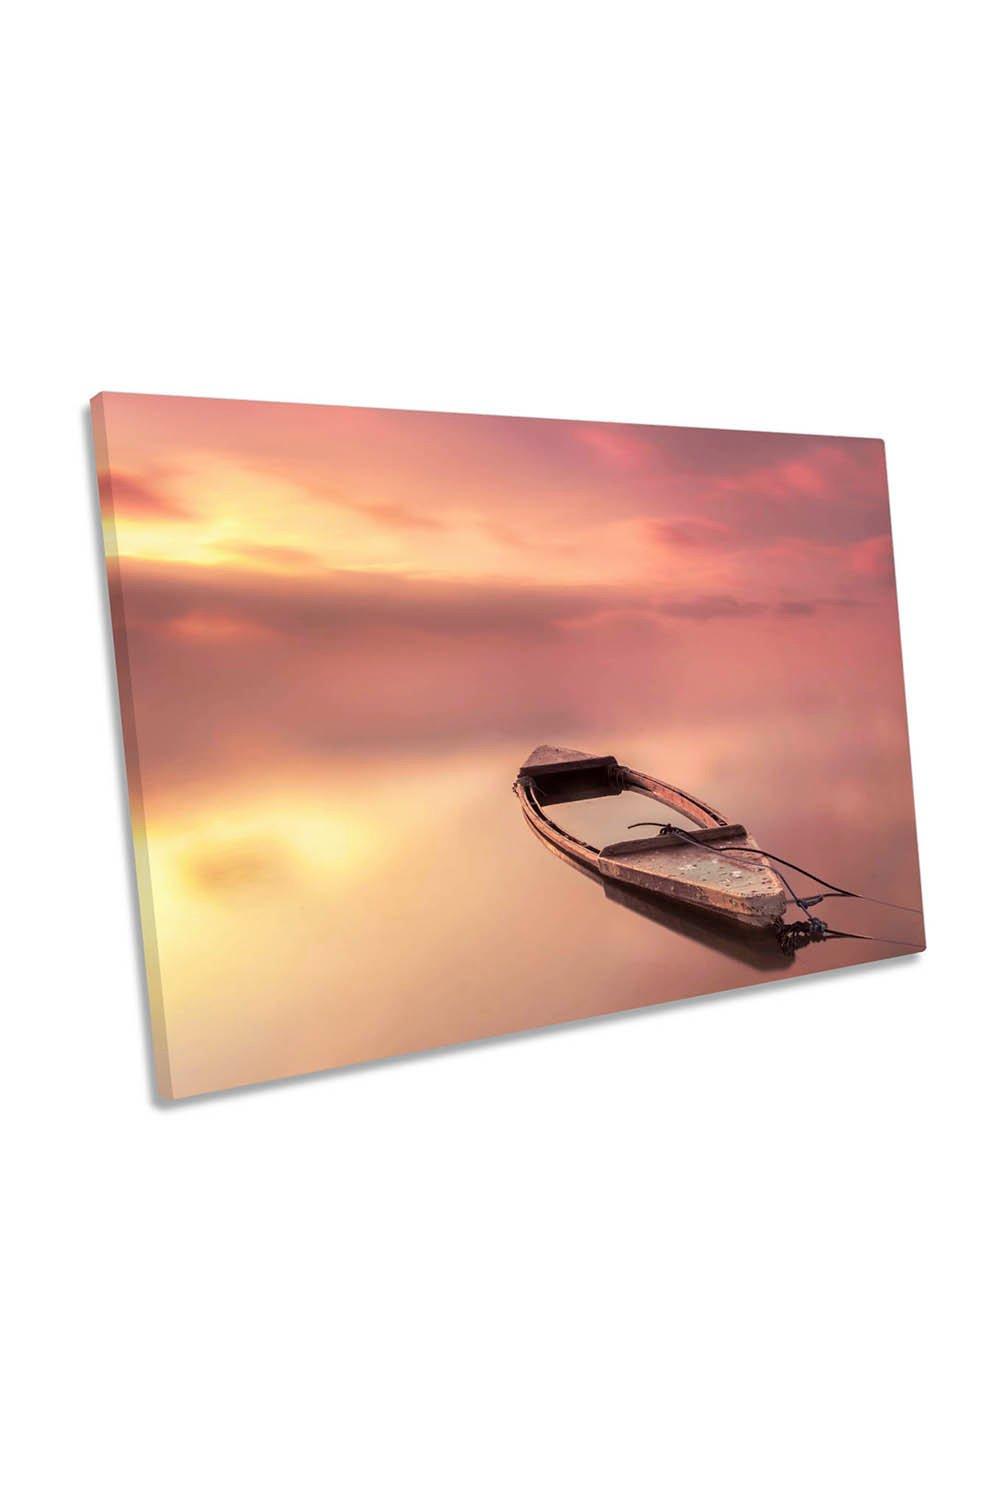 The Boat Pink Sunset Lake Canvas Wall Art Picture Print